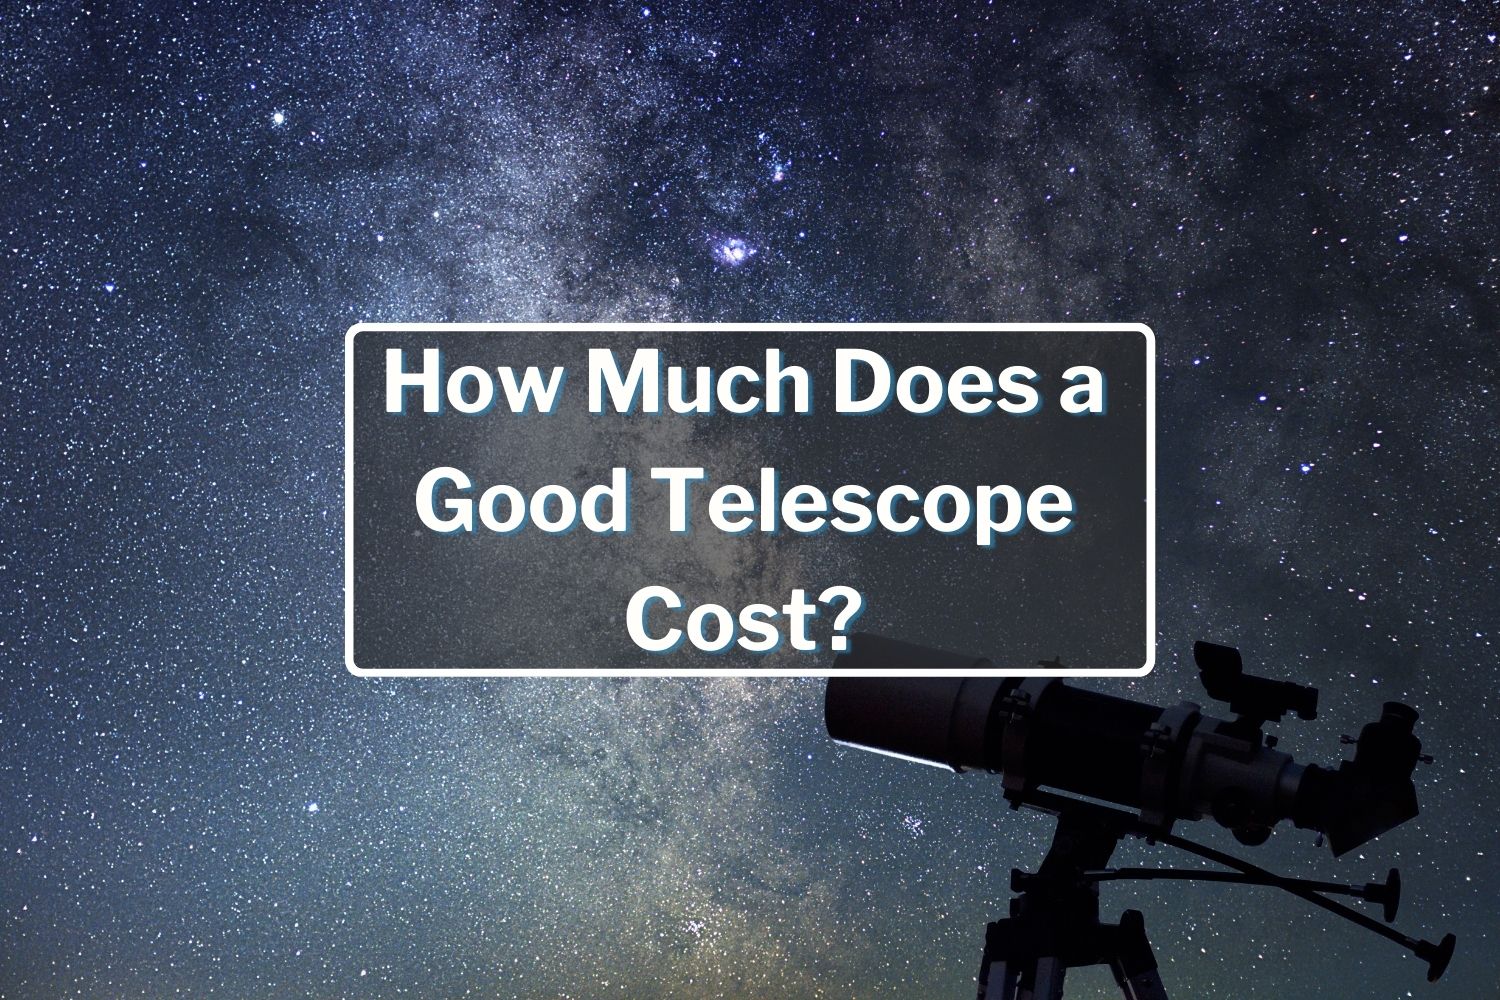 How Much Does a Good Telescope Cost?